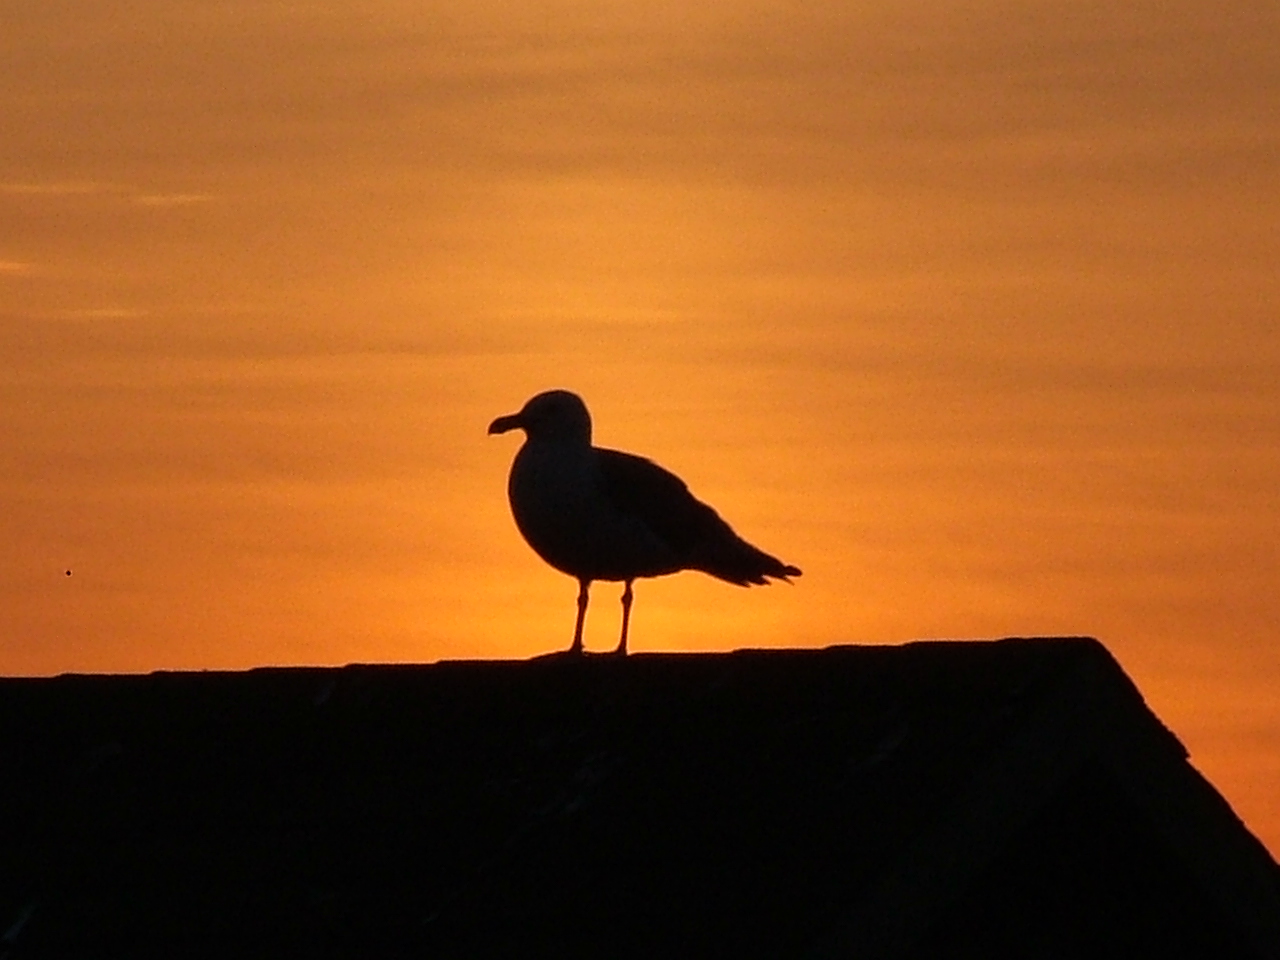 Seagull at Sunset (user submitted)